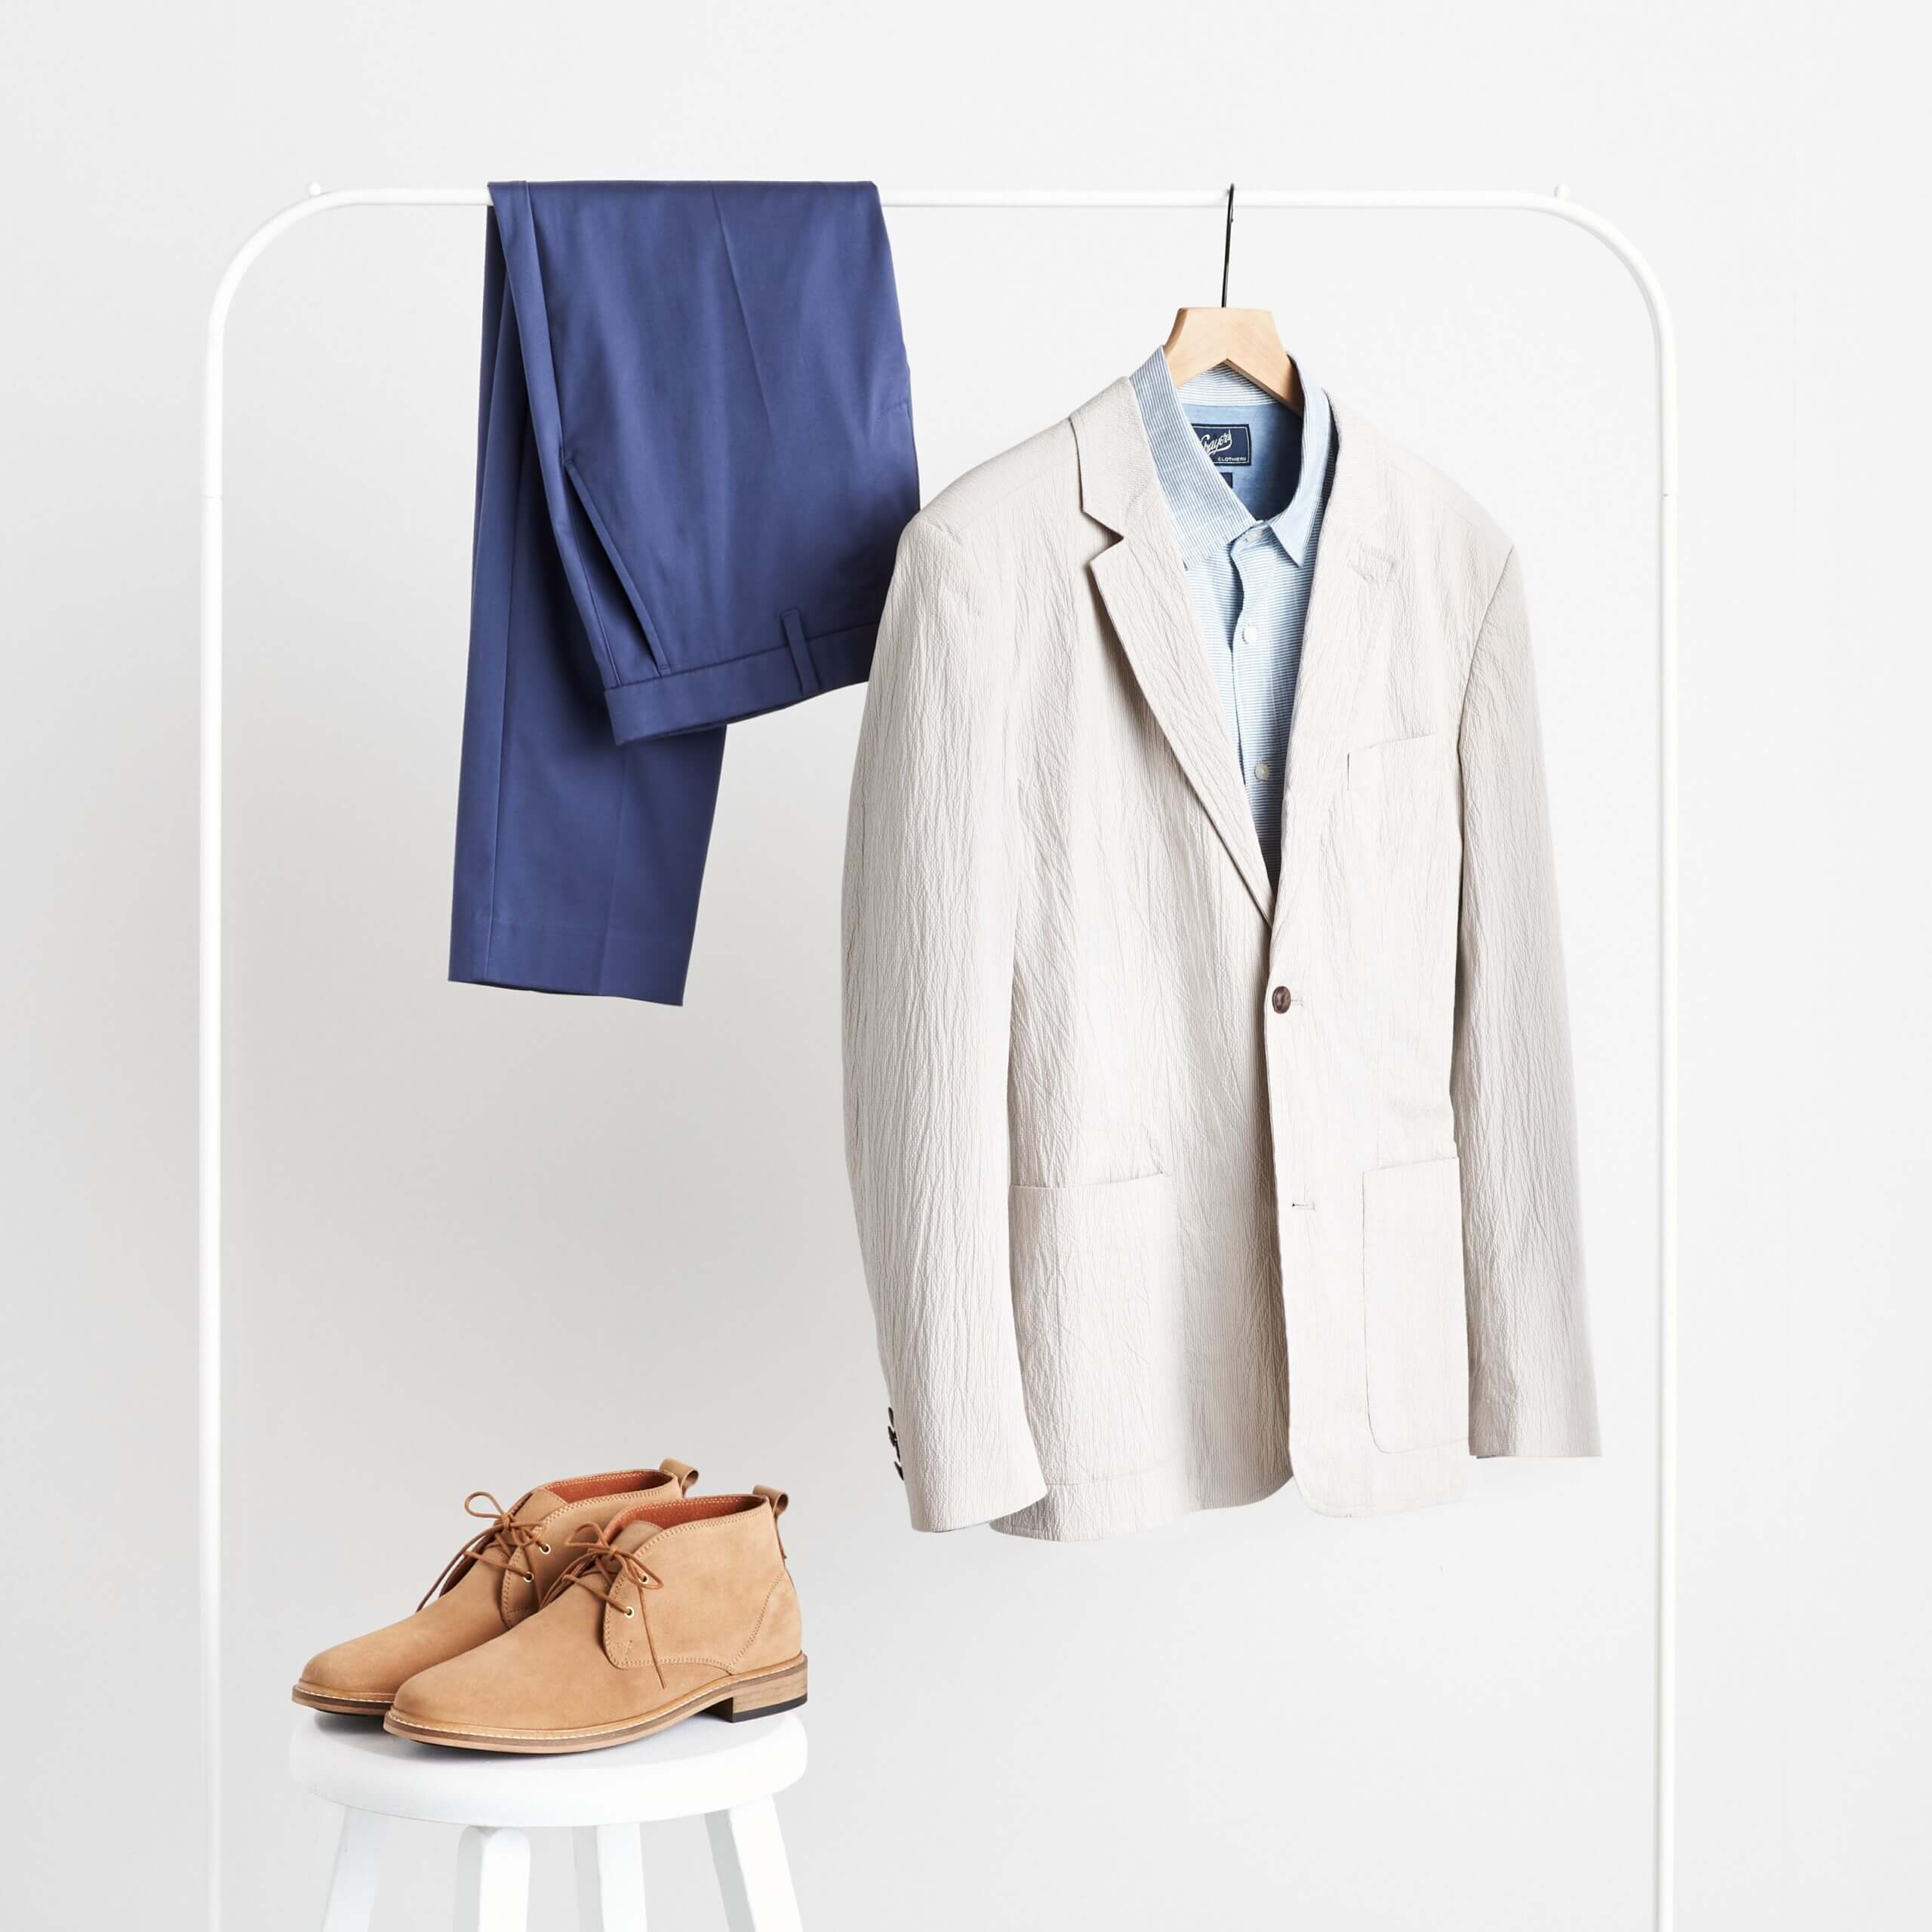 Blue Suit with Light Blue Dress Shirt Outfits (391 ideas & outfits